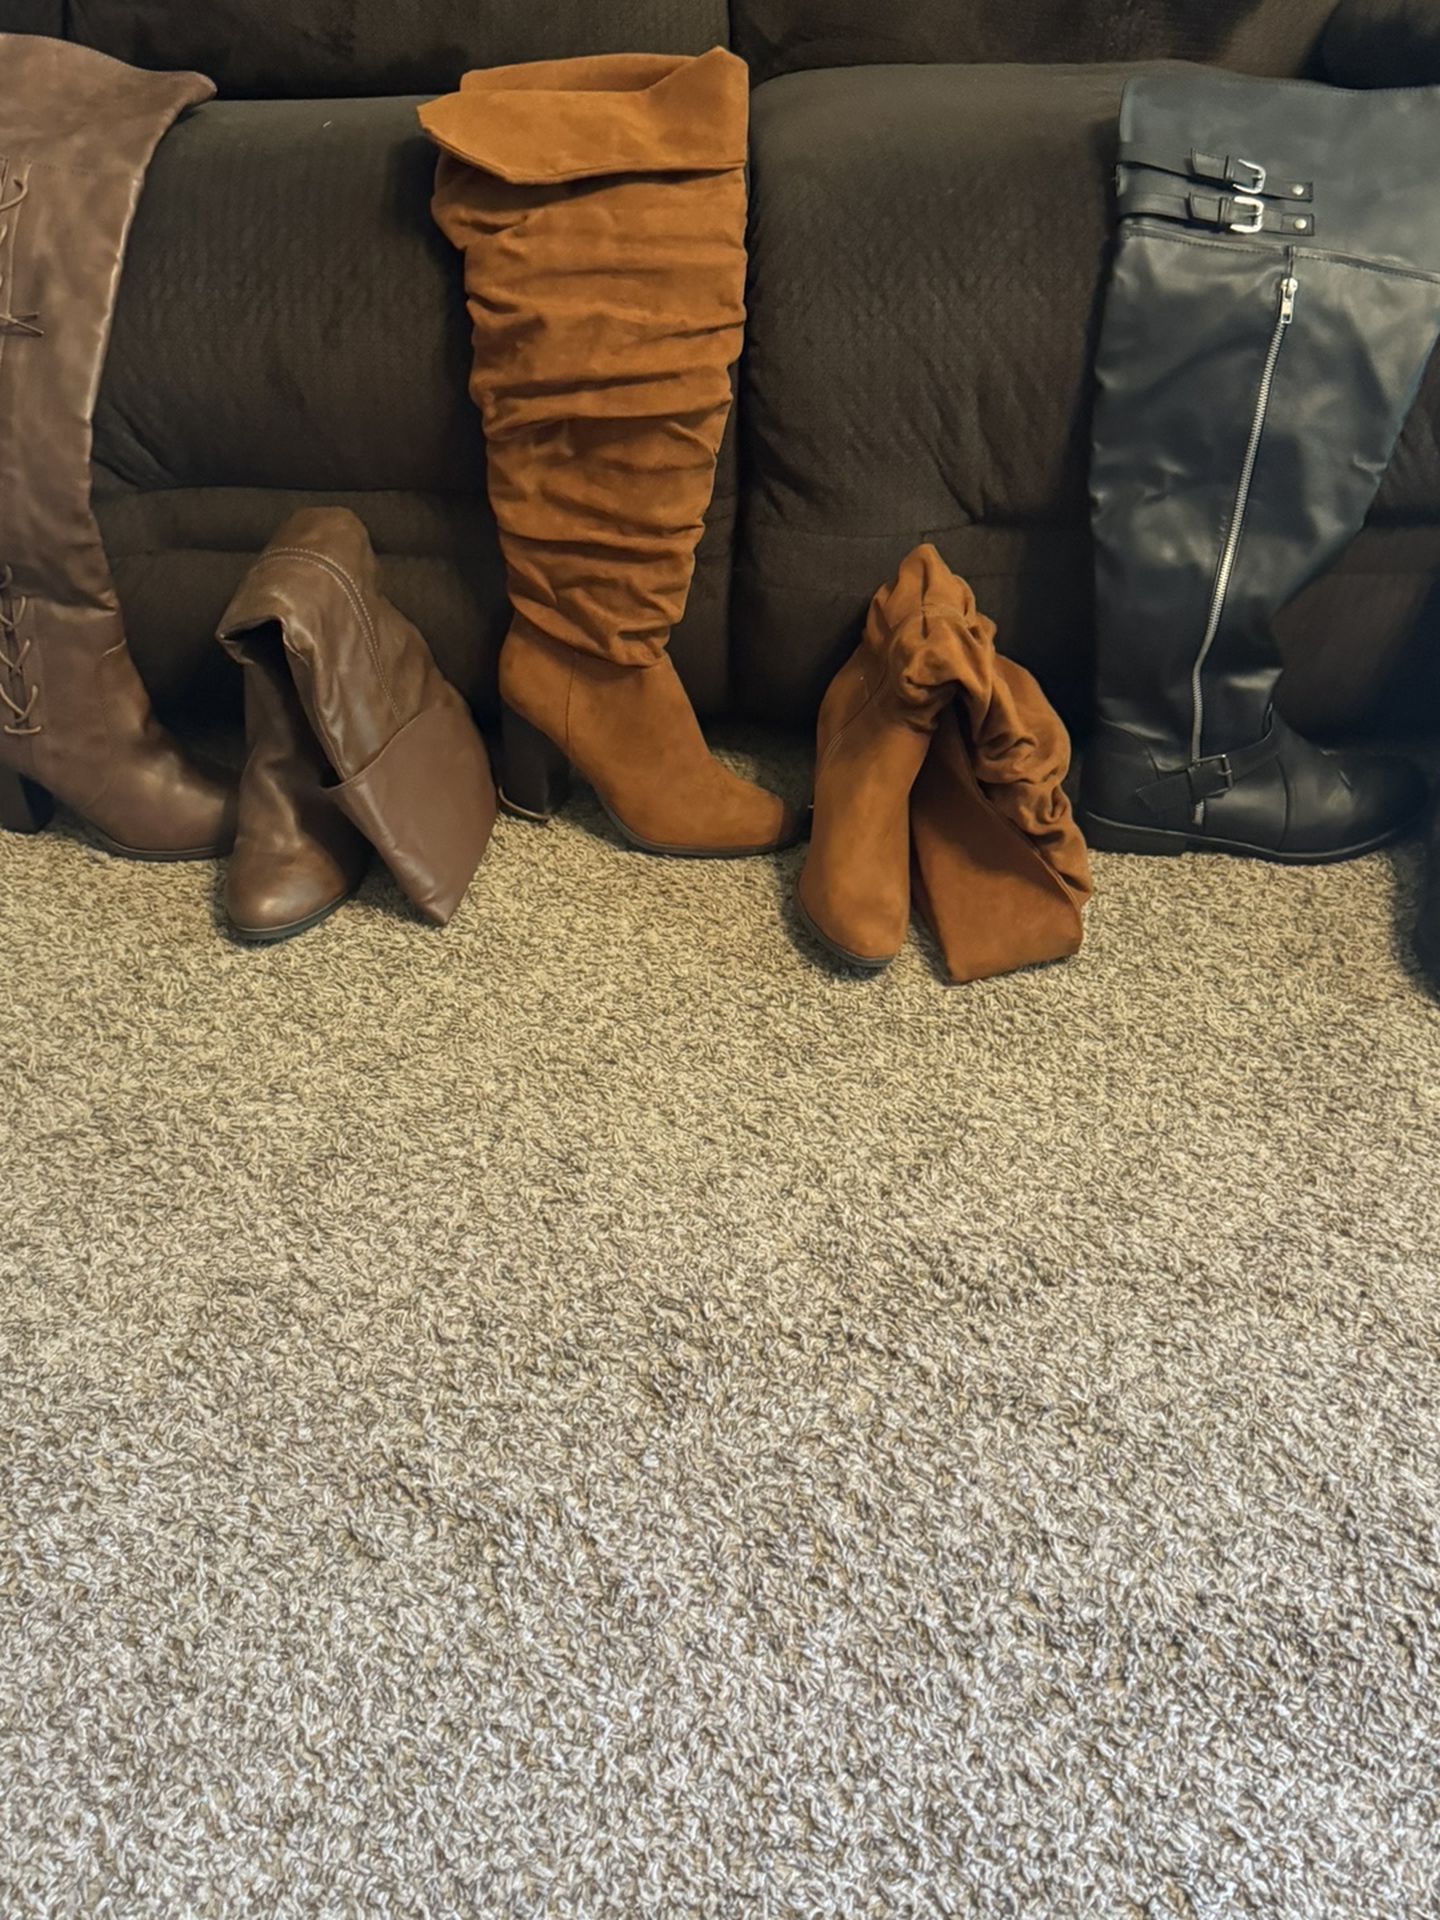 3 Pairs Of Knee High Boots Size 9.5 Like New